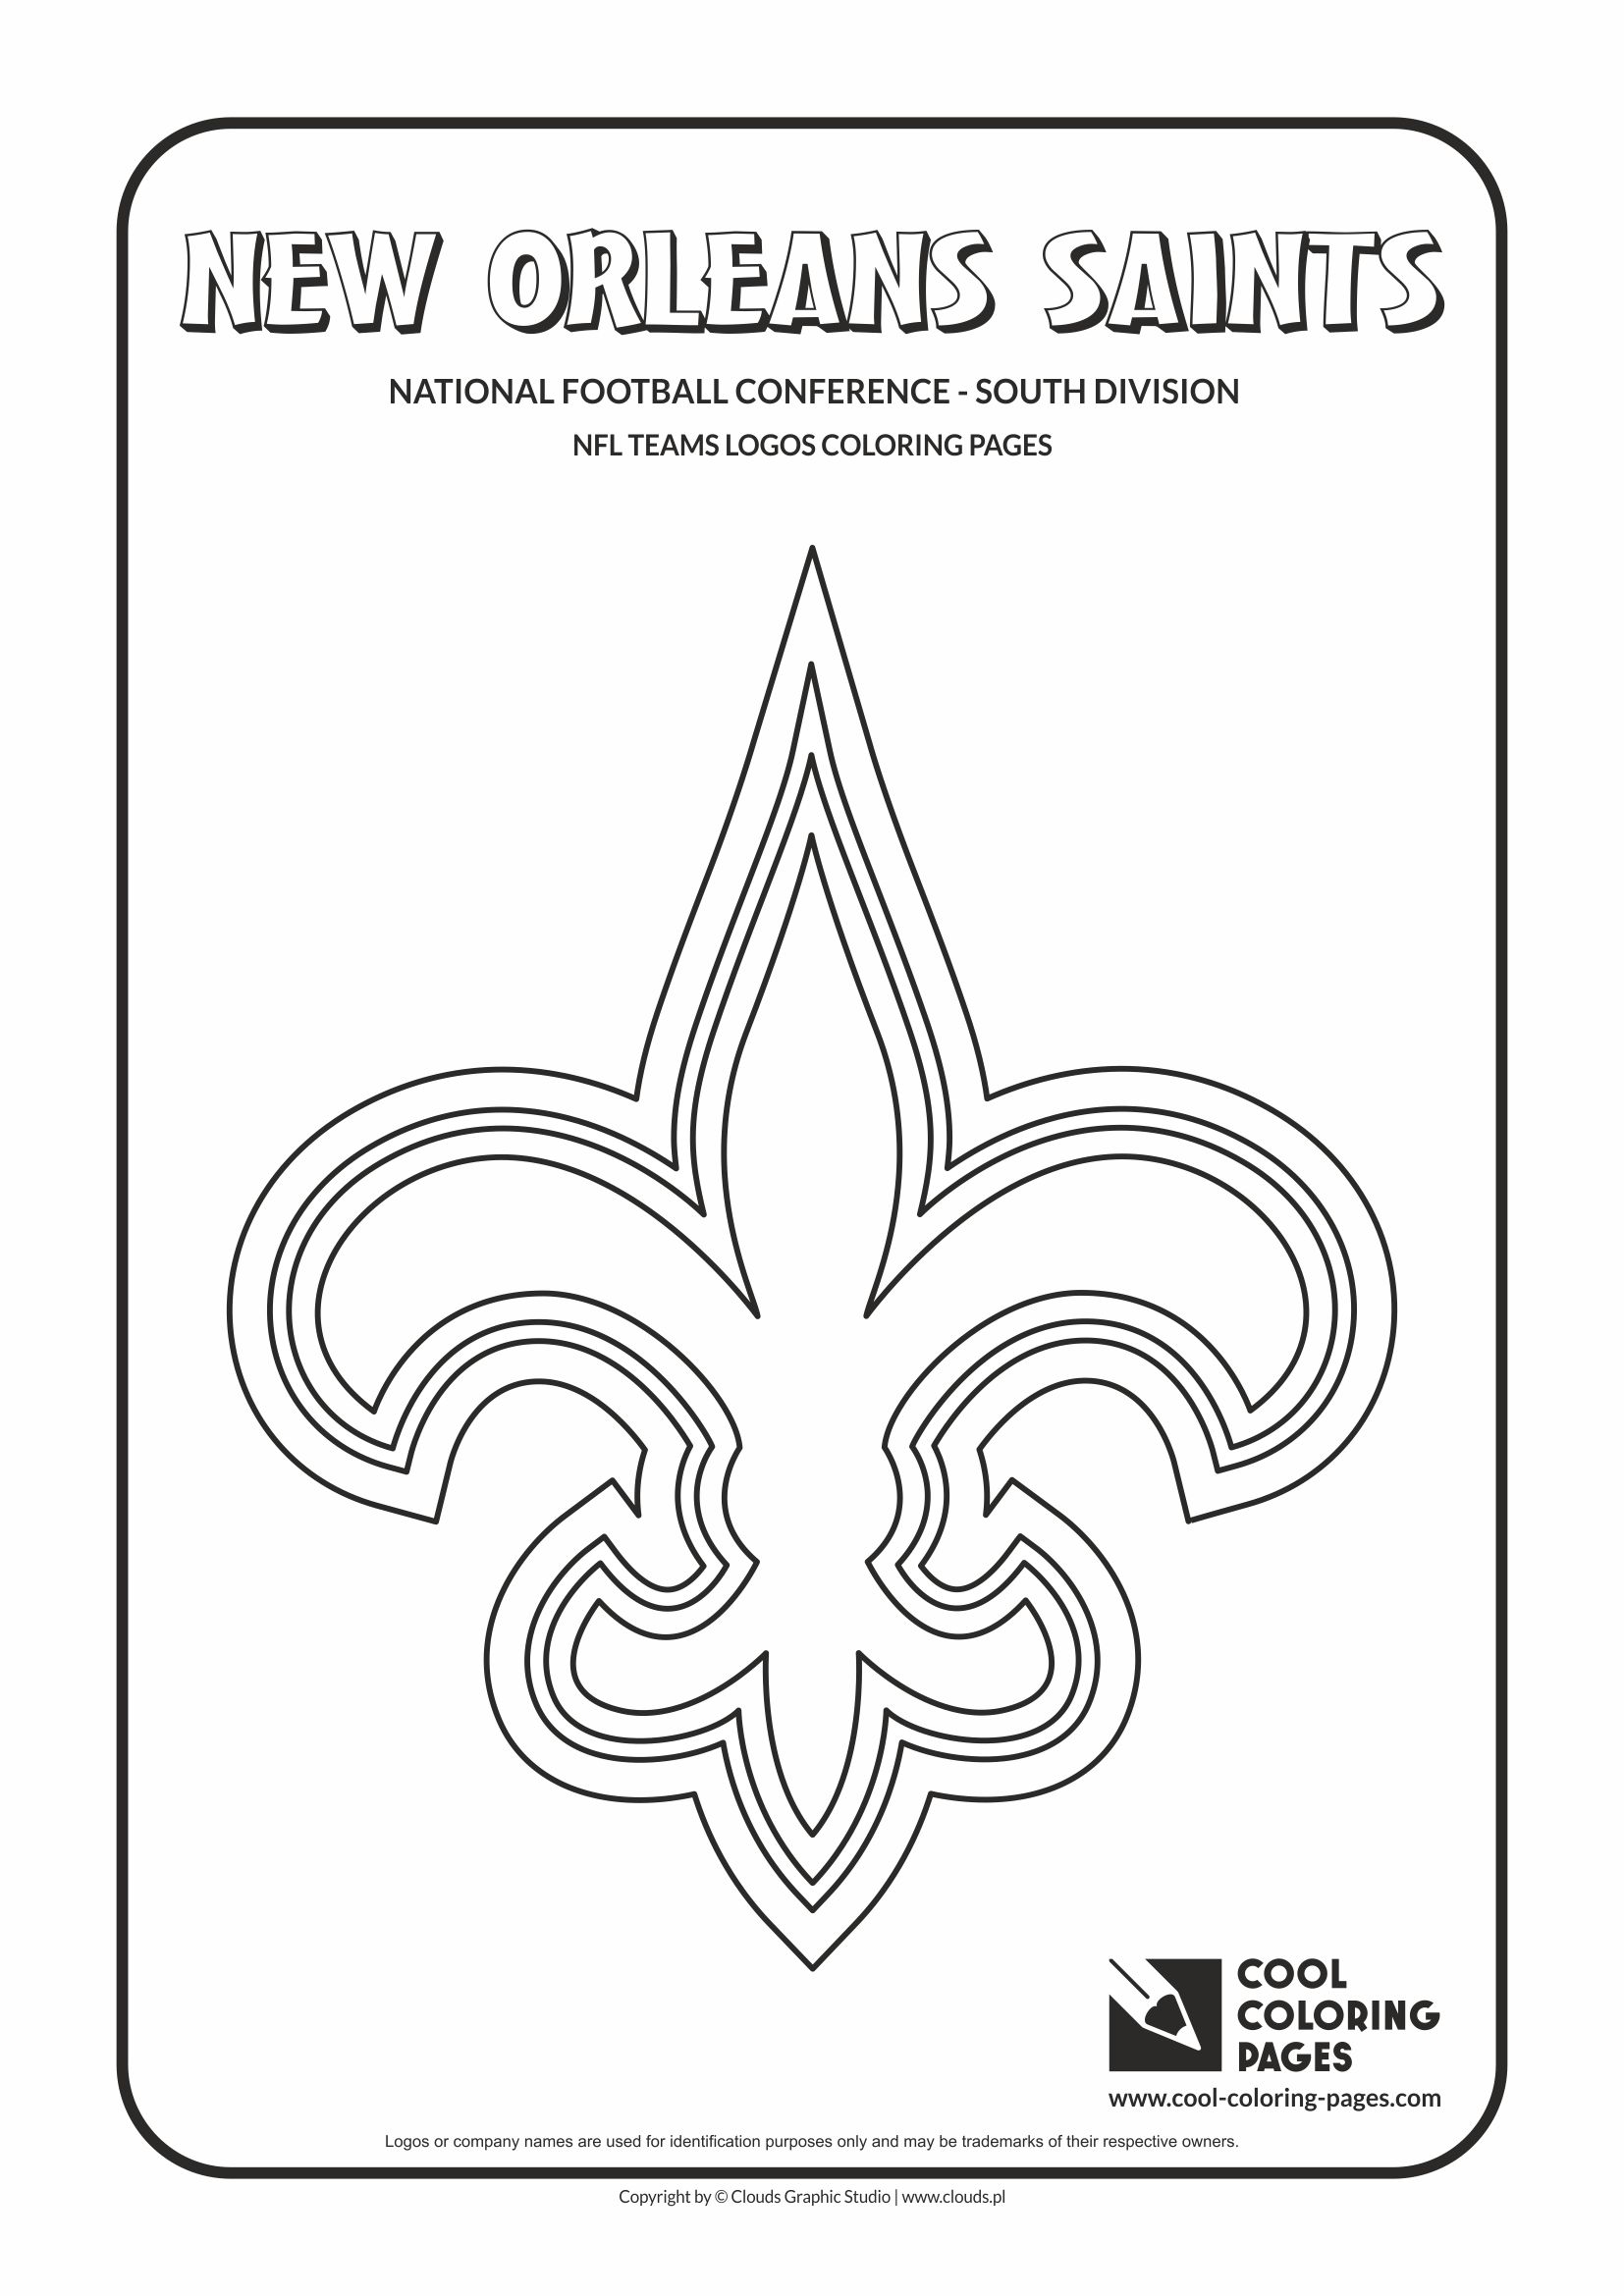 444 Cute Nfl Football Team Logos Coloring Pages with disney character